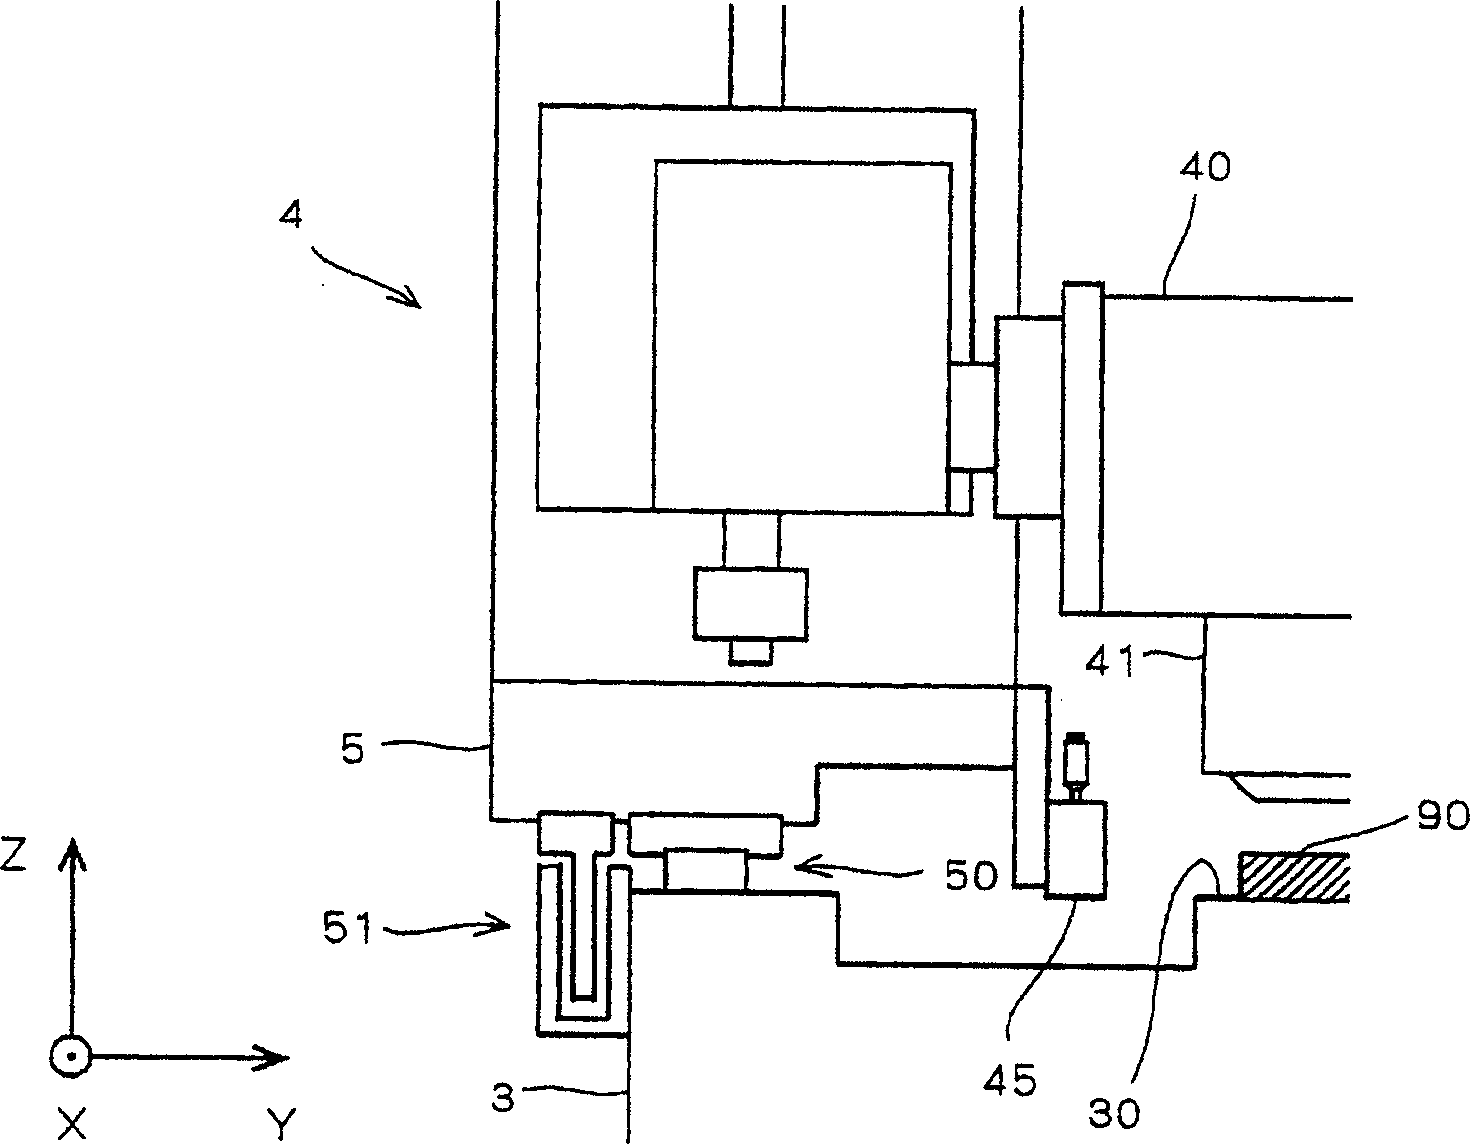 Base plate processing device